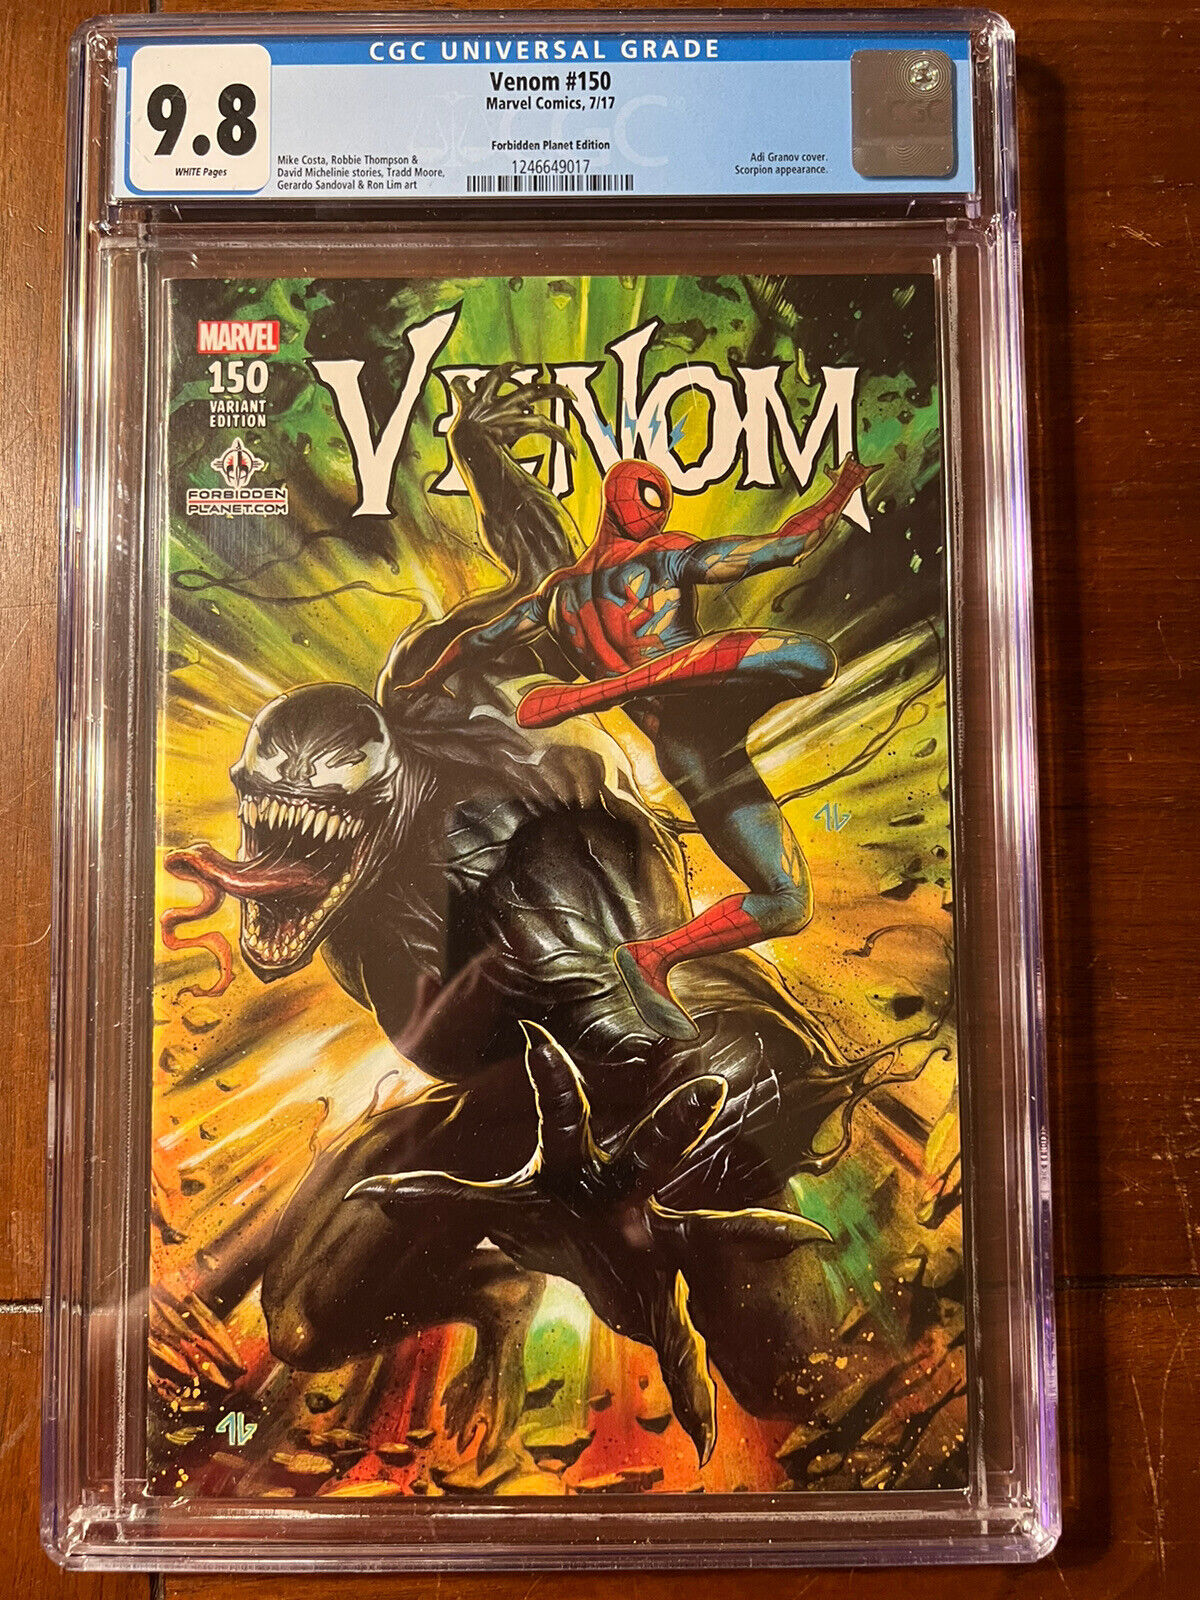 VENOM #150 7/17 CGC 9.8 FORBIDDEN PLANET EDITION VARIANT WHITE PAGES NICE